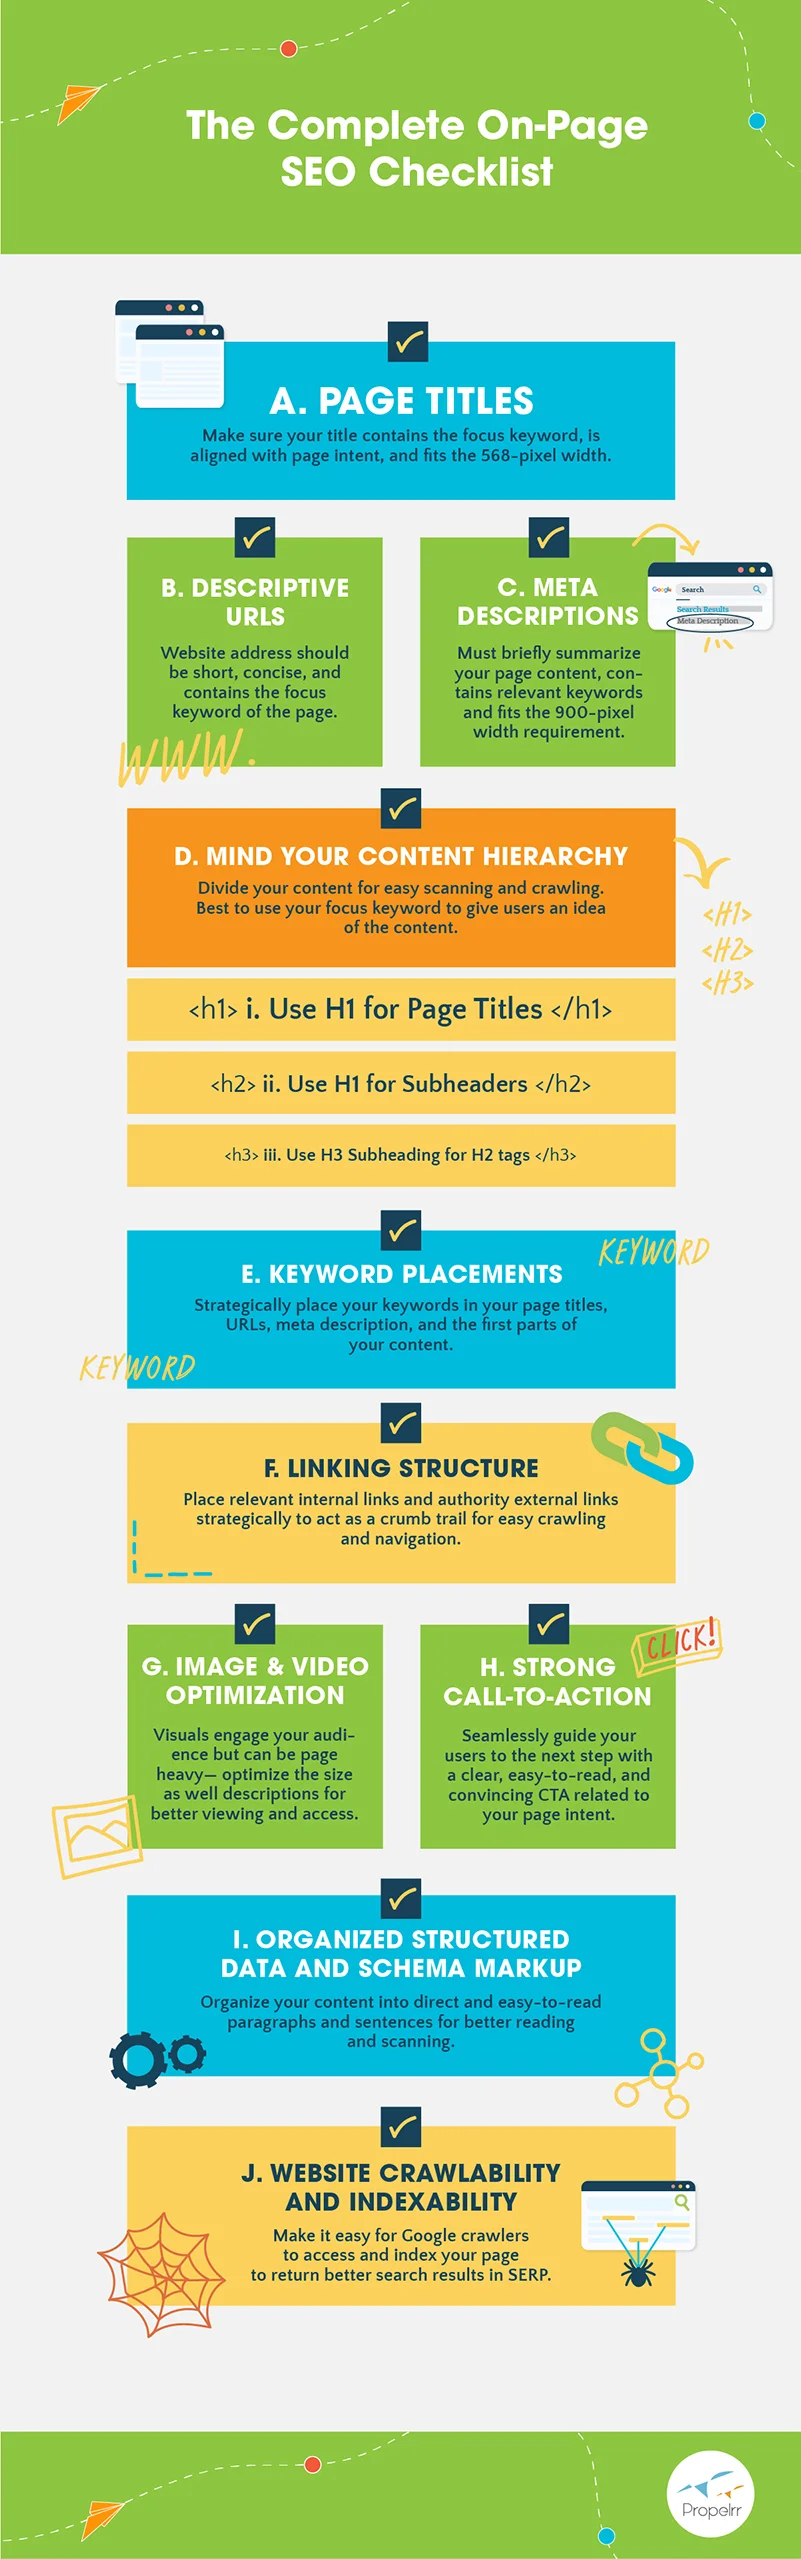 On-Page SEO Checklist - Infographic